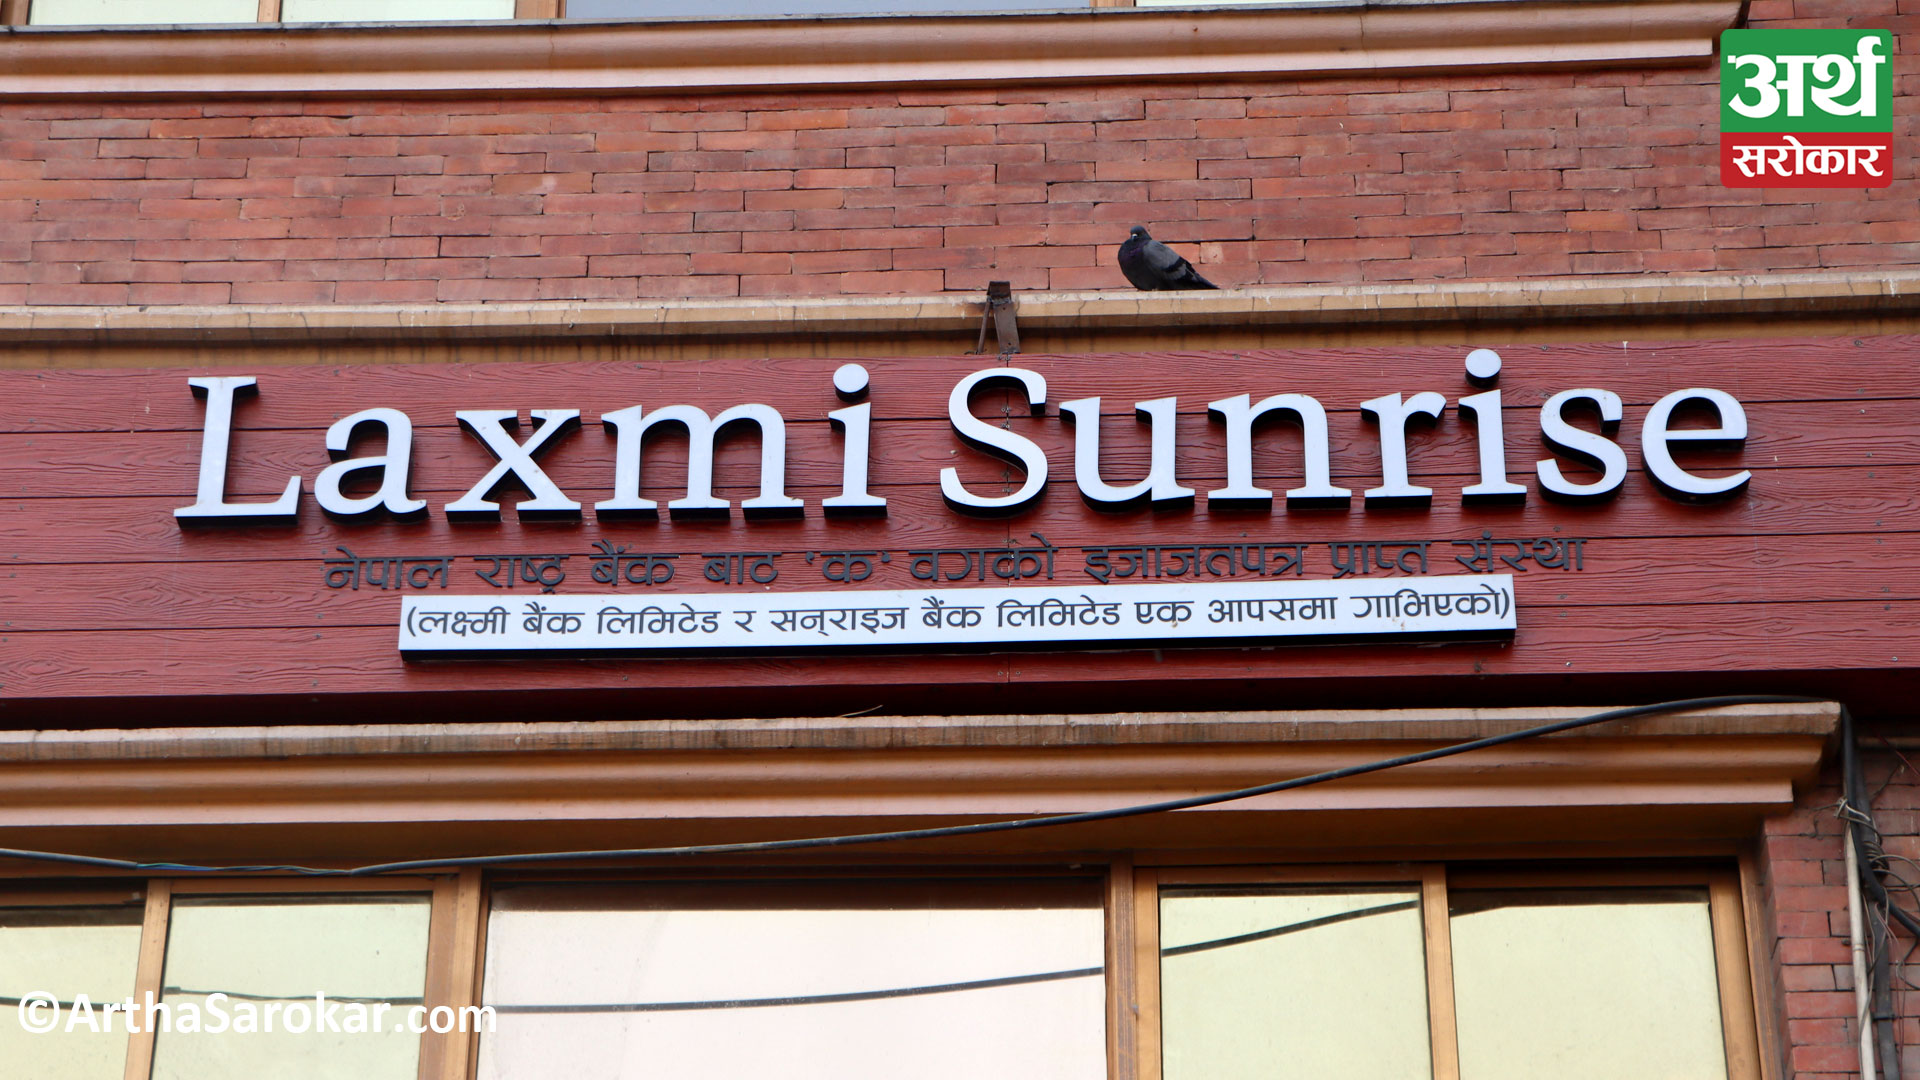 Laxmi Sunrise expands its services in Lalitpur